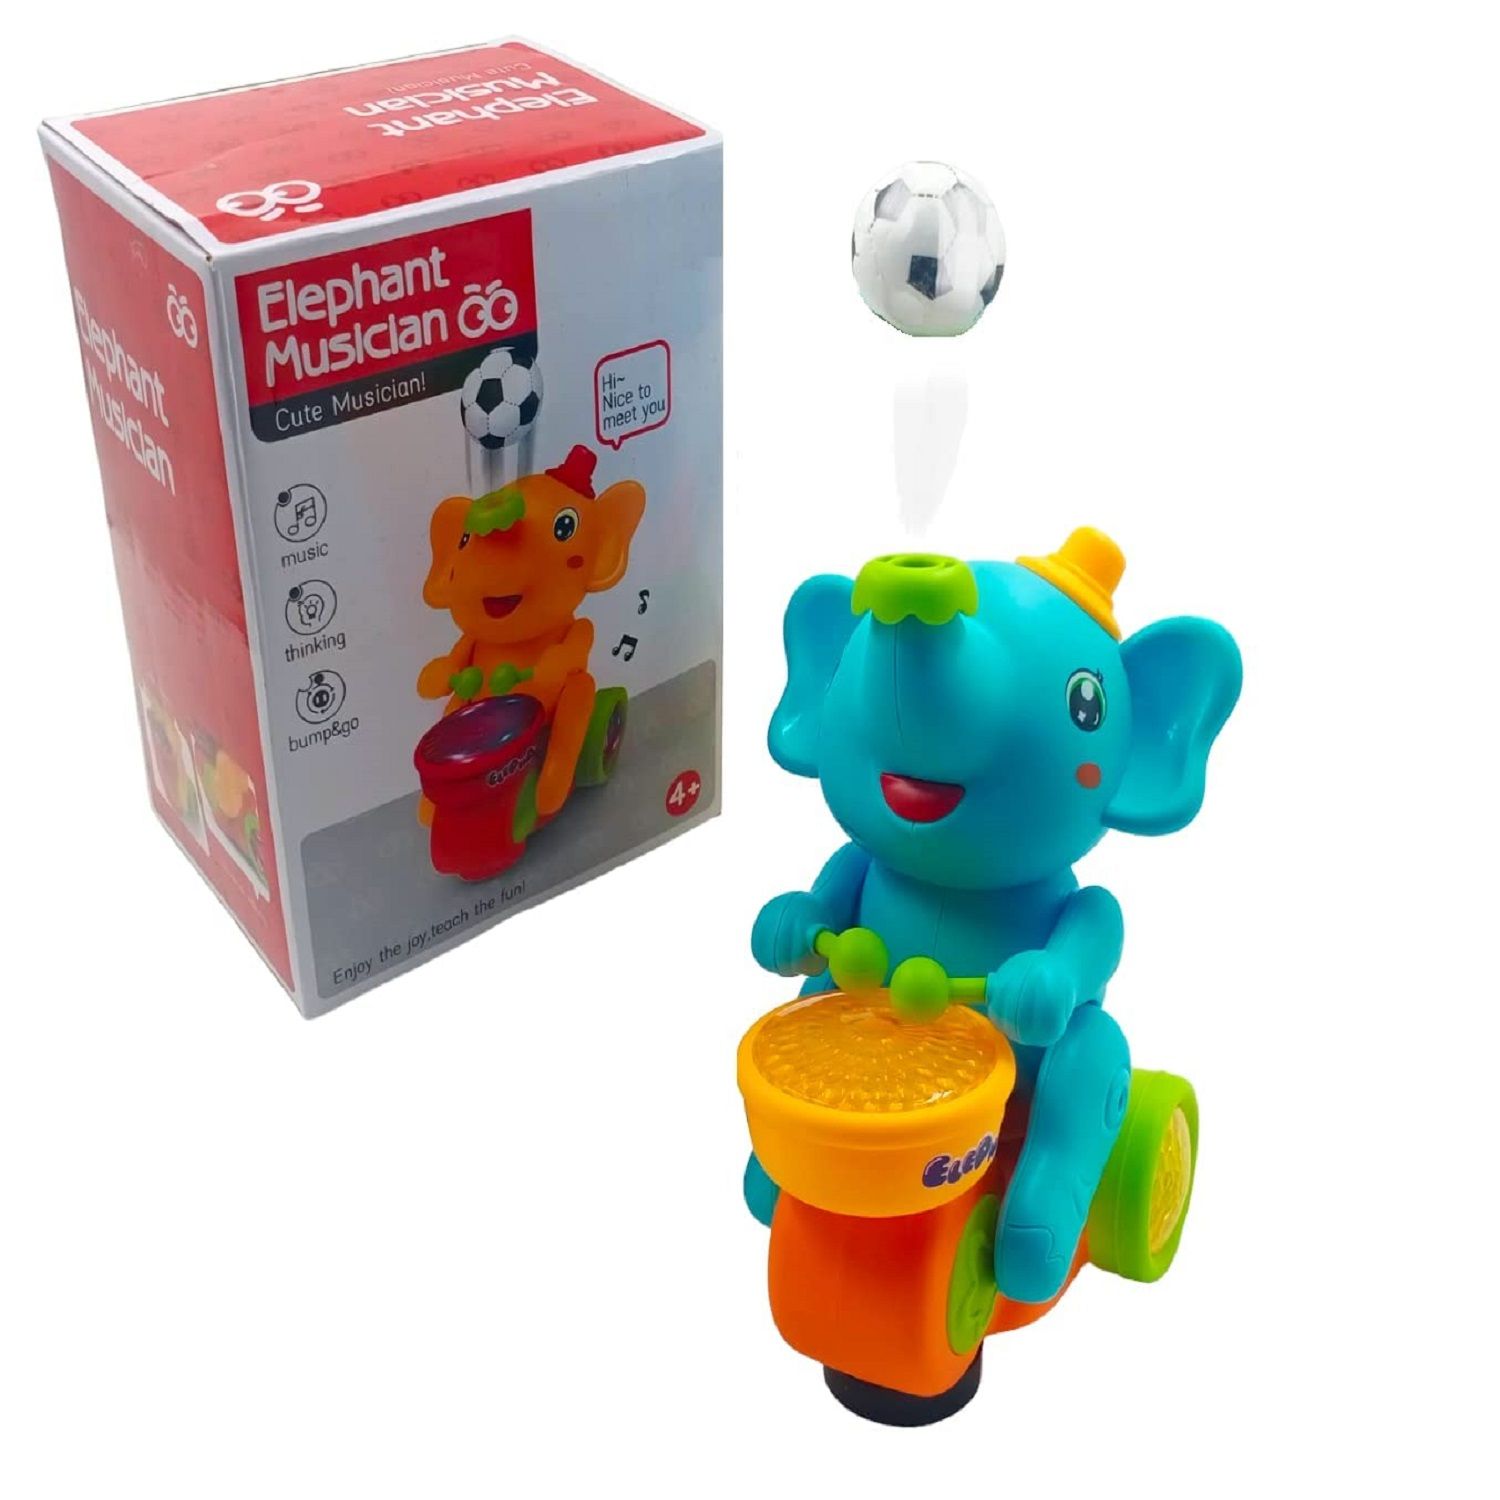 Elephant Musician Toy with Levitation Ball on Nose Along with Dazzling Light Drum Sound Music and Elephant Sound for Baby Toys and Toys for Boy Girl (Multicolor, Pack of 1)